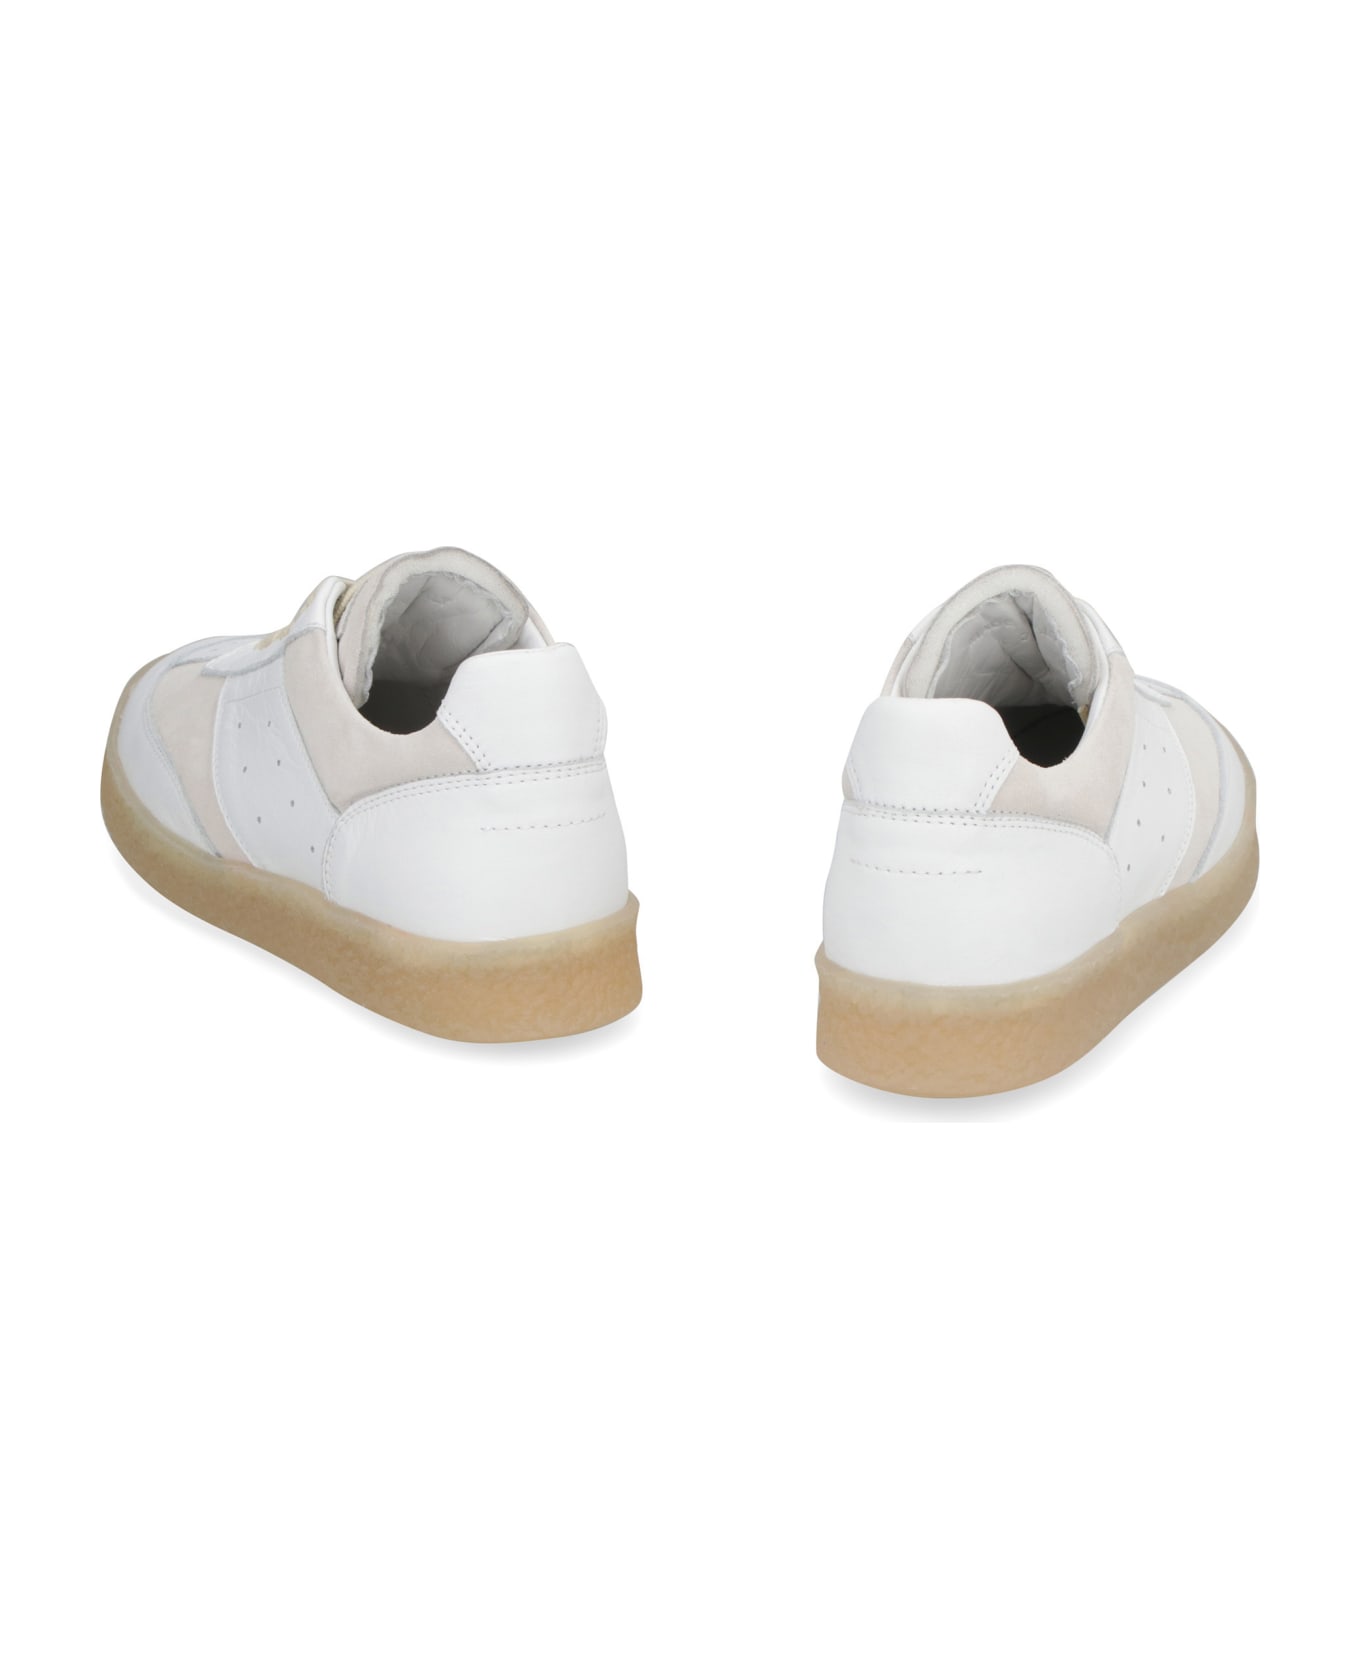 MM6 Maison Margiela Leather And Suede Sneakers - White スニーカー